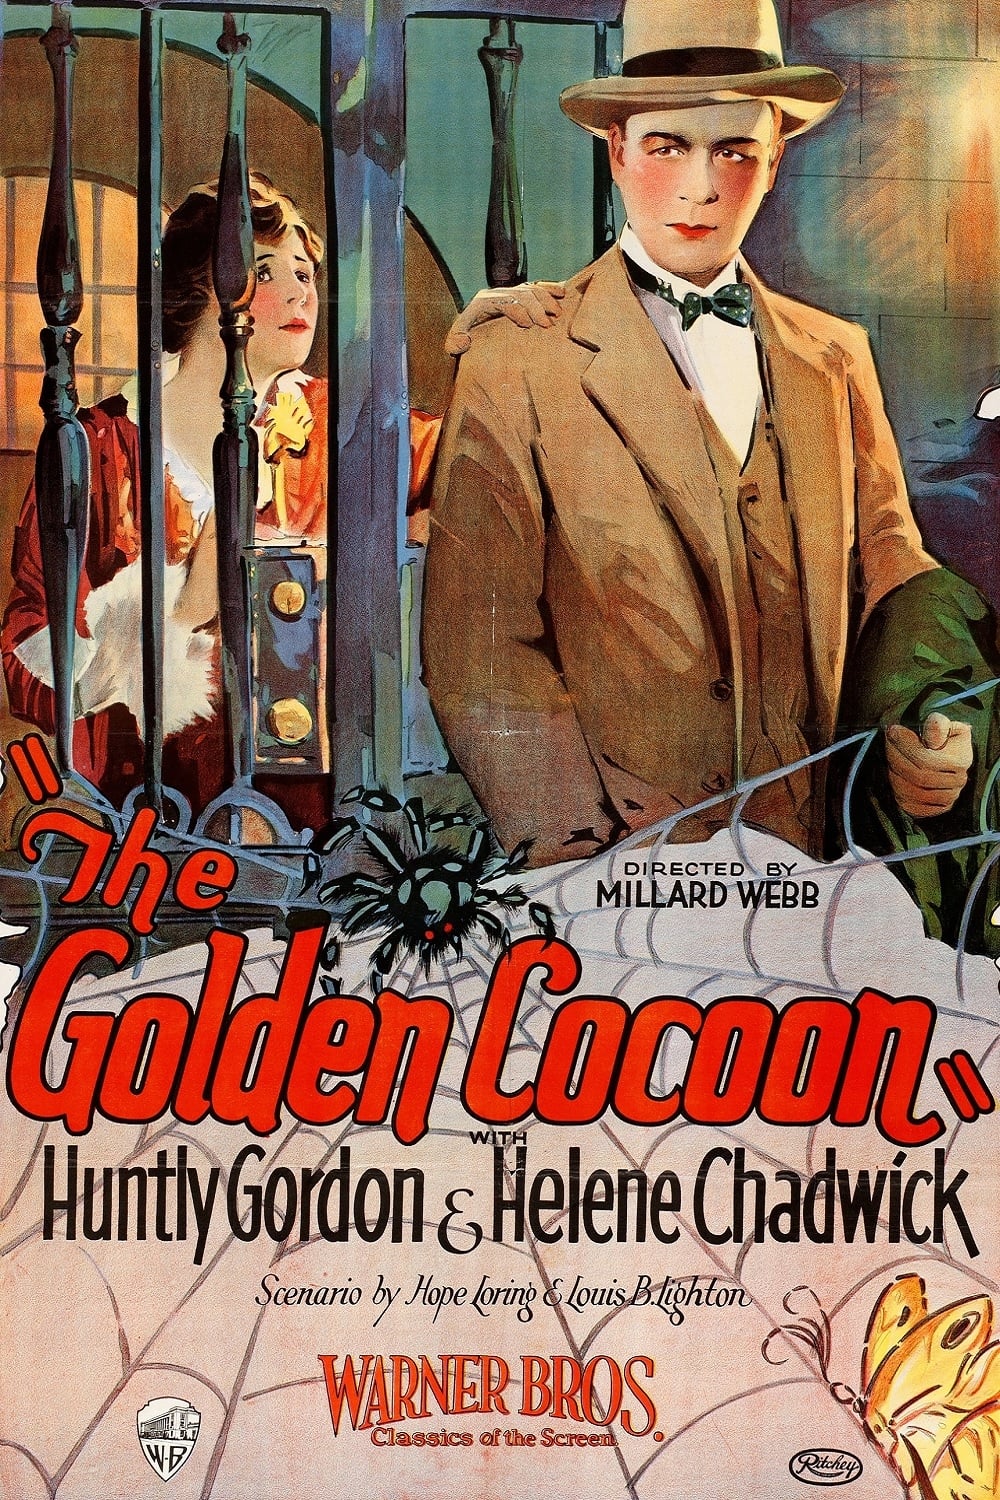 The Golden Cocoon (1925)